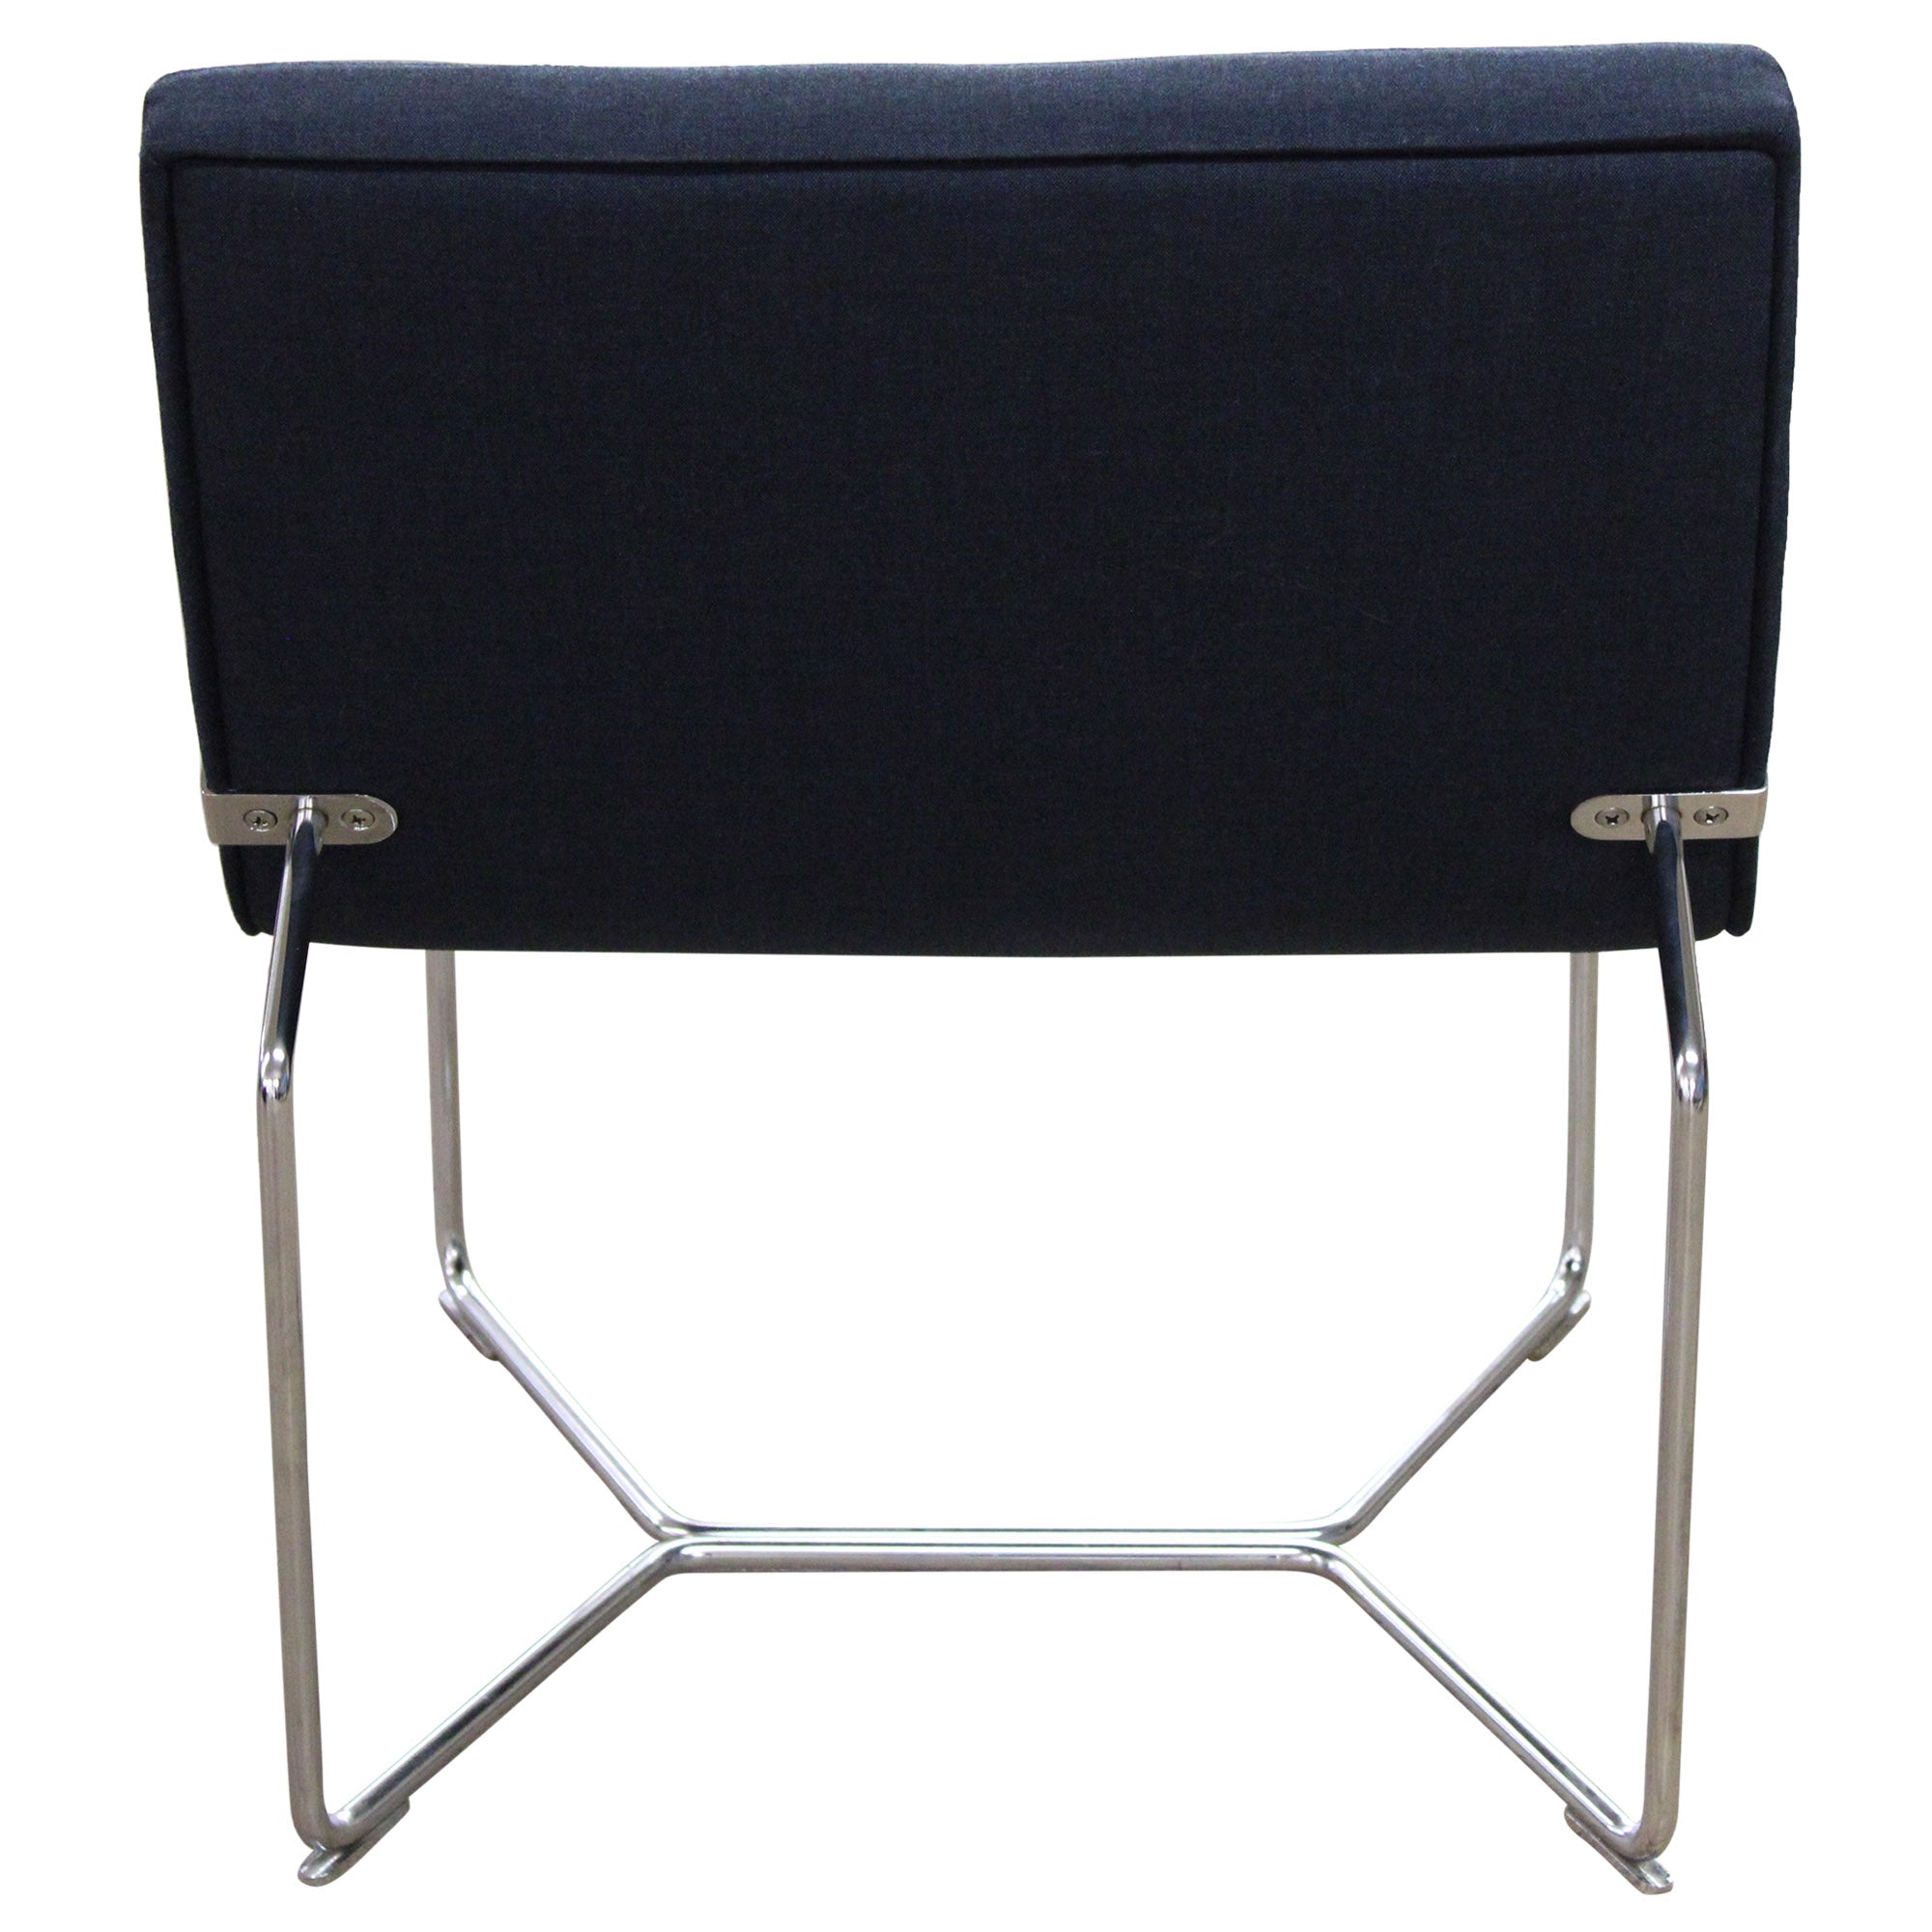 Harter Forum Lounge Chair, Navy - Preowned